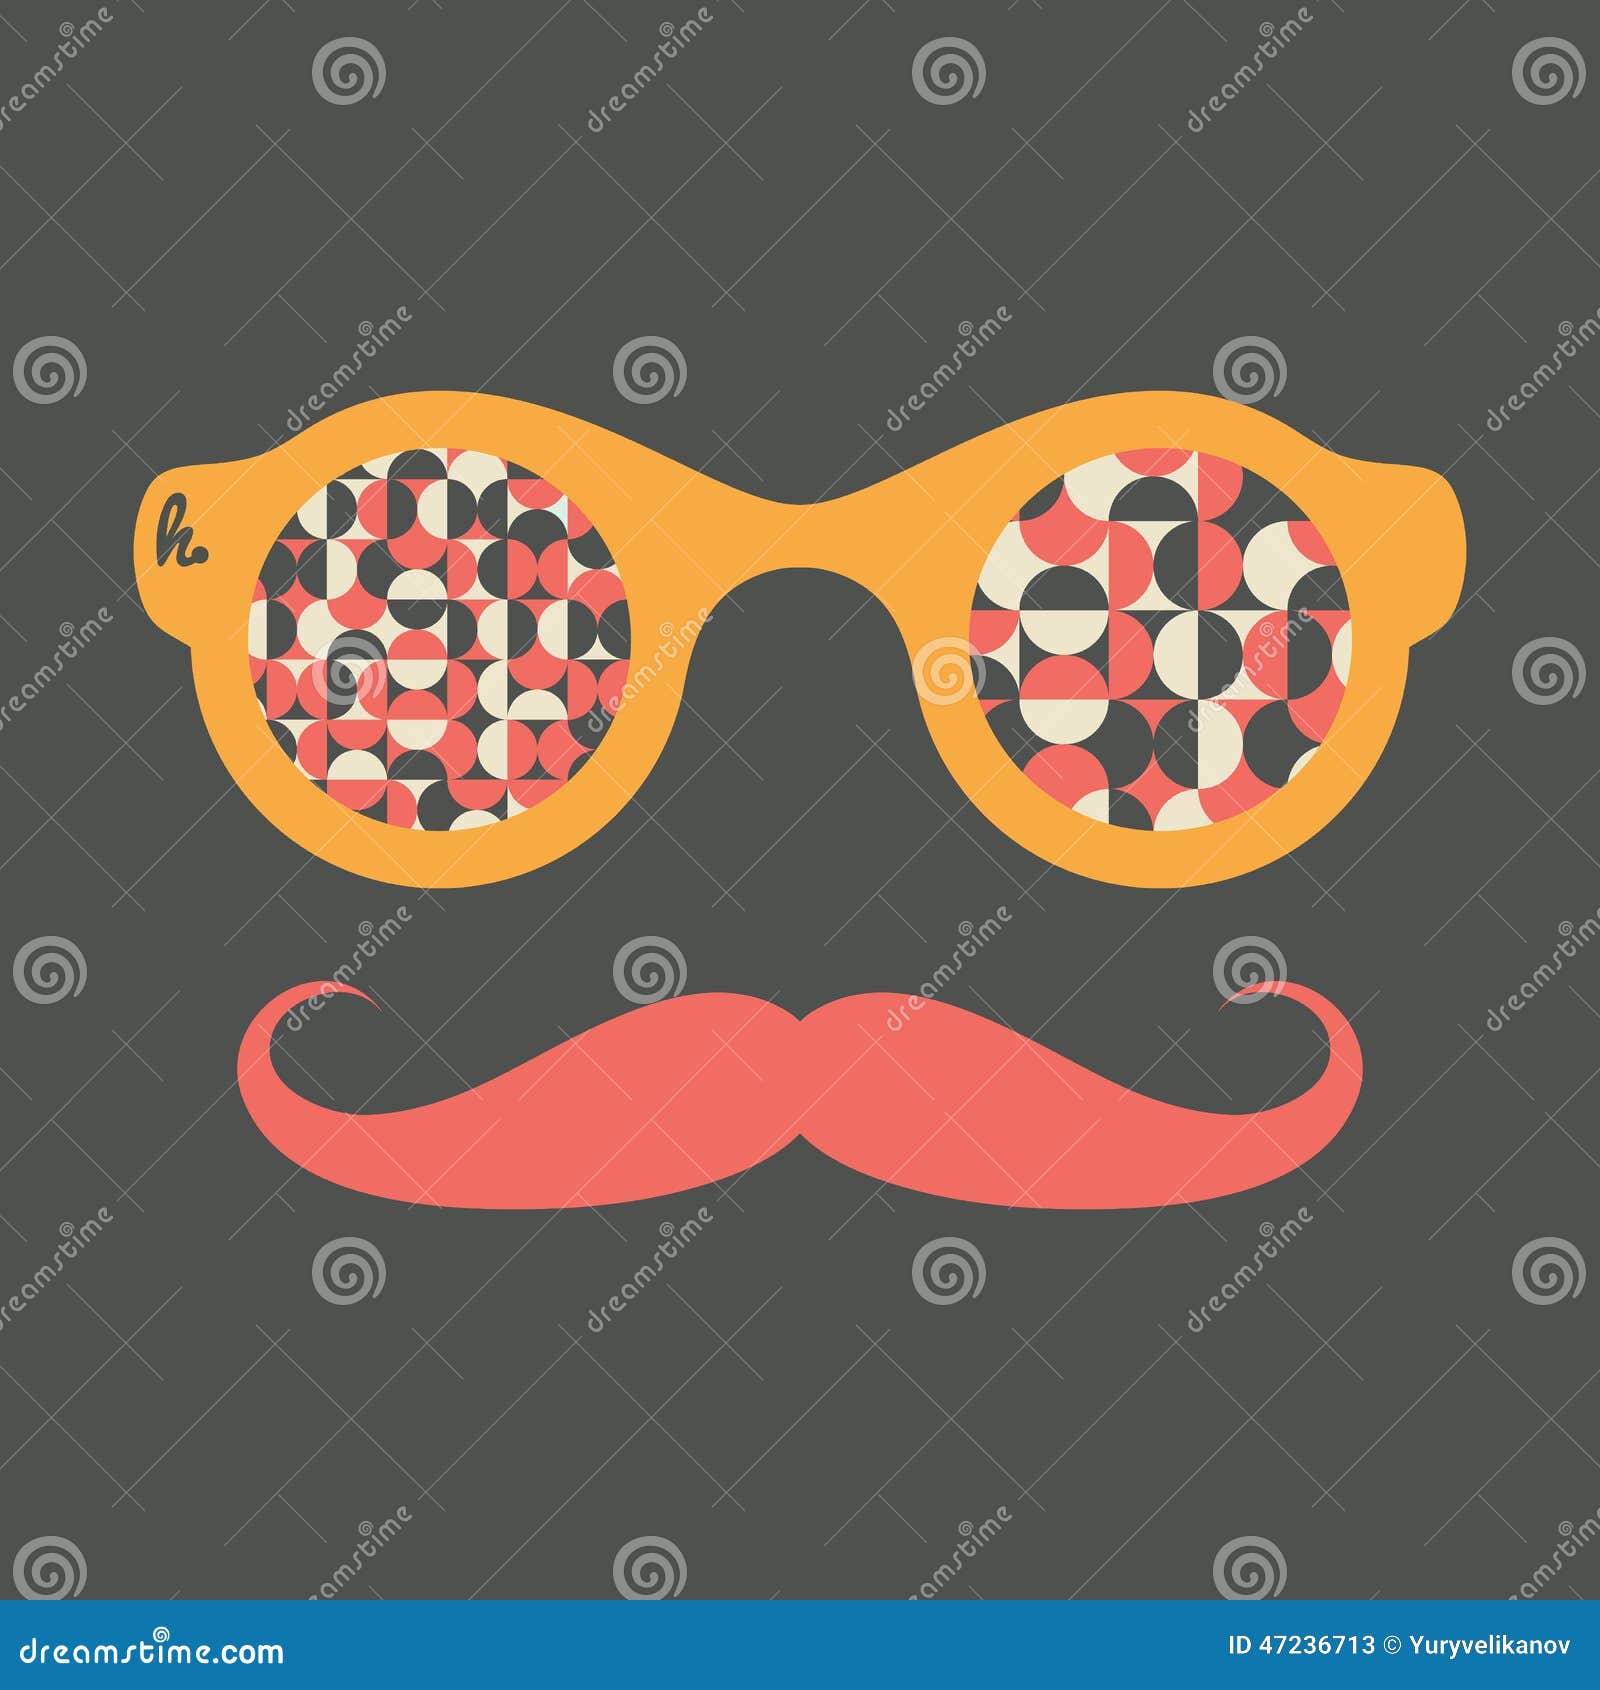 hipster vintage sunglasses with circles and semicircles.